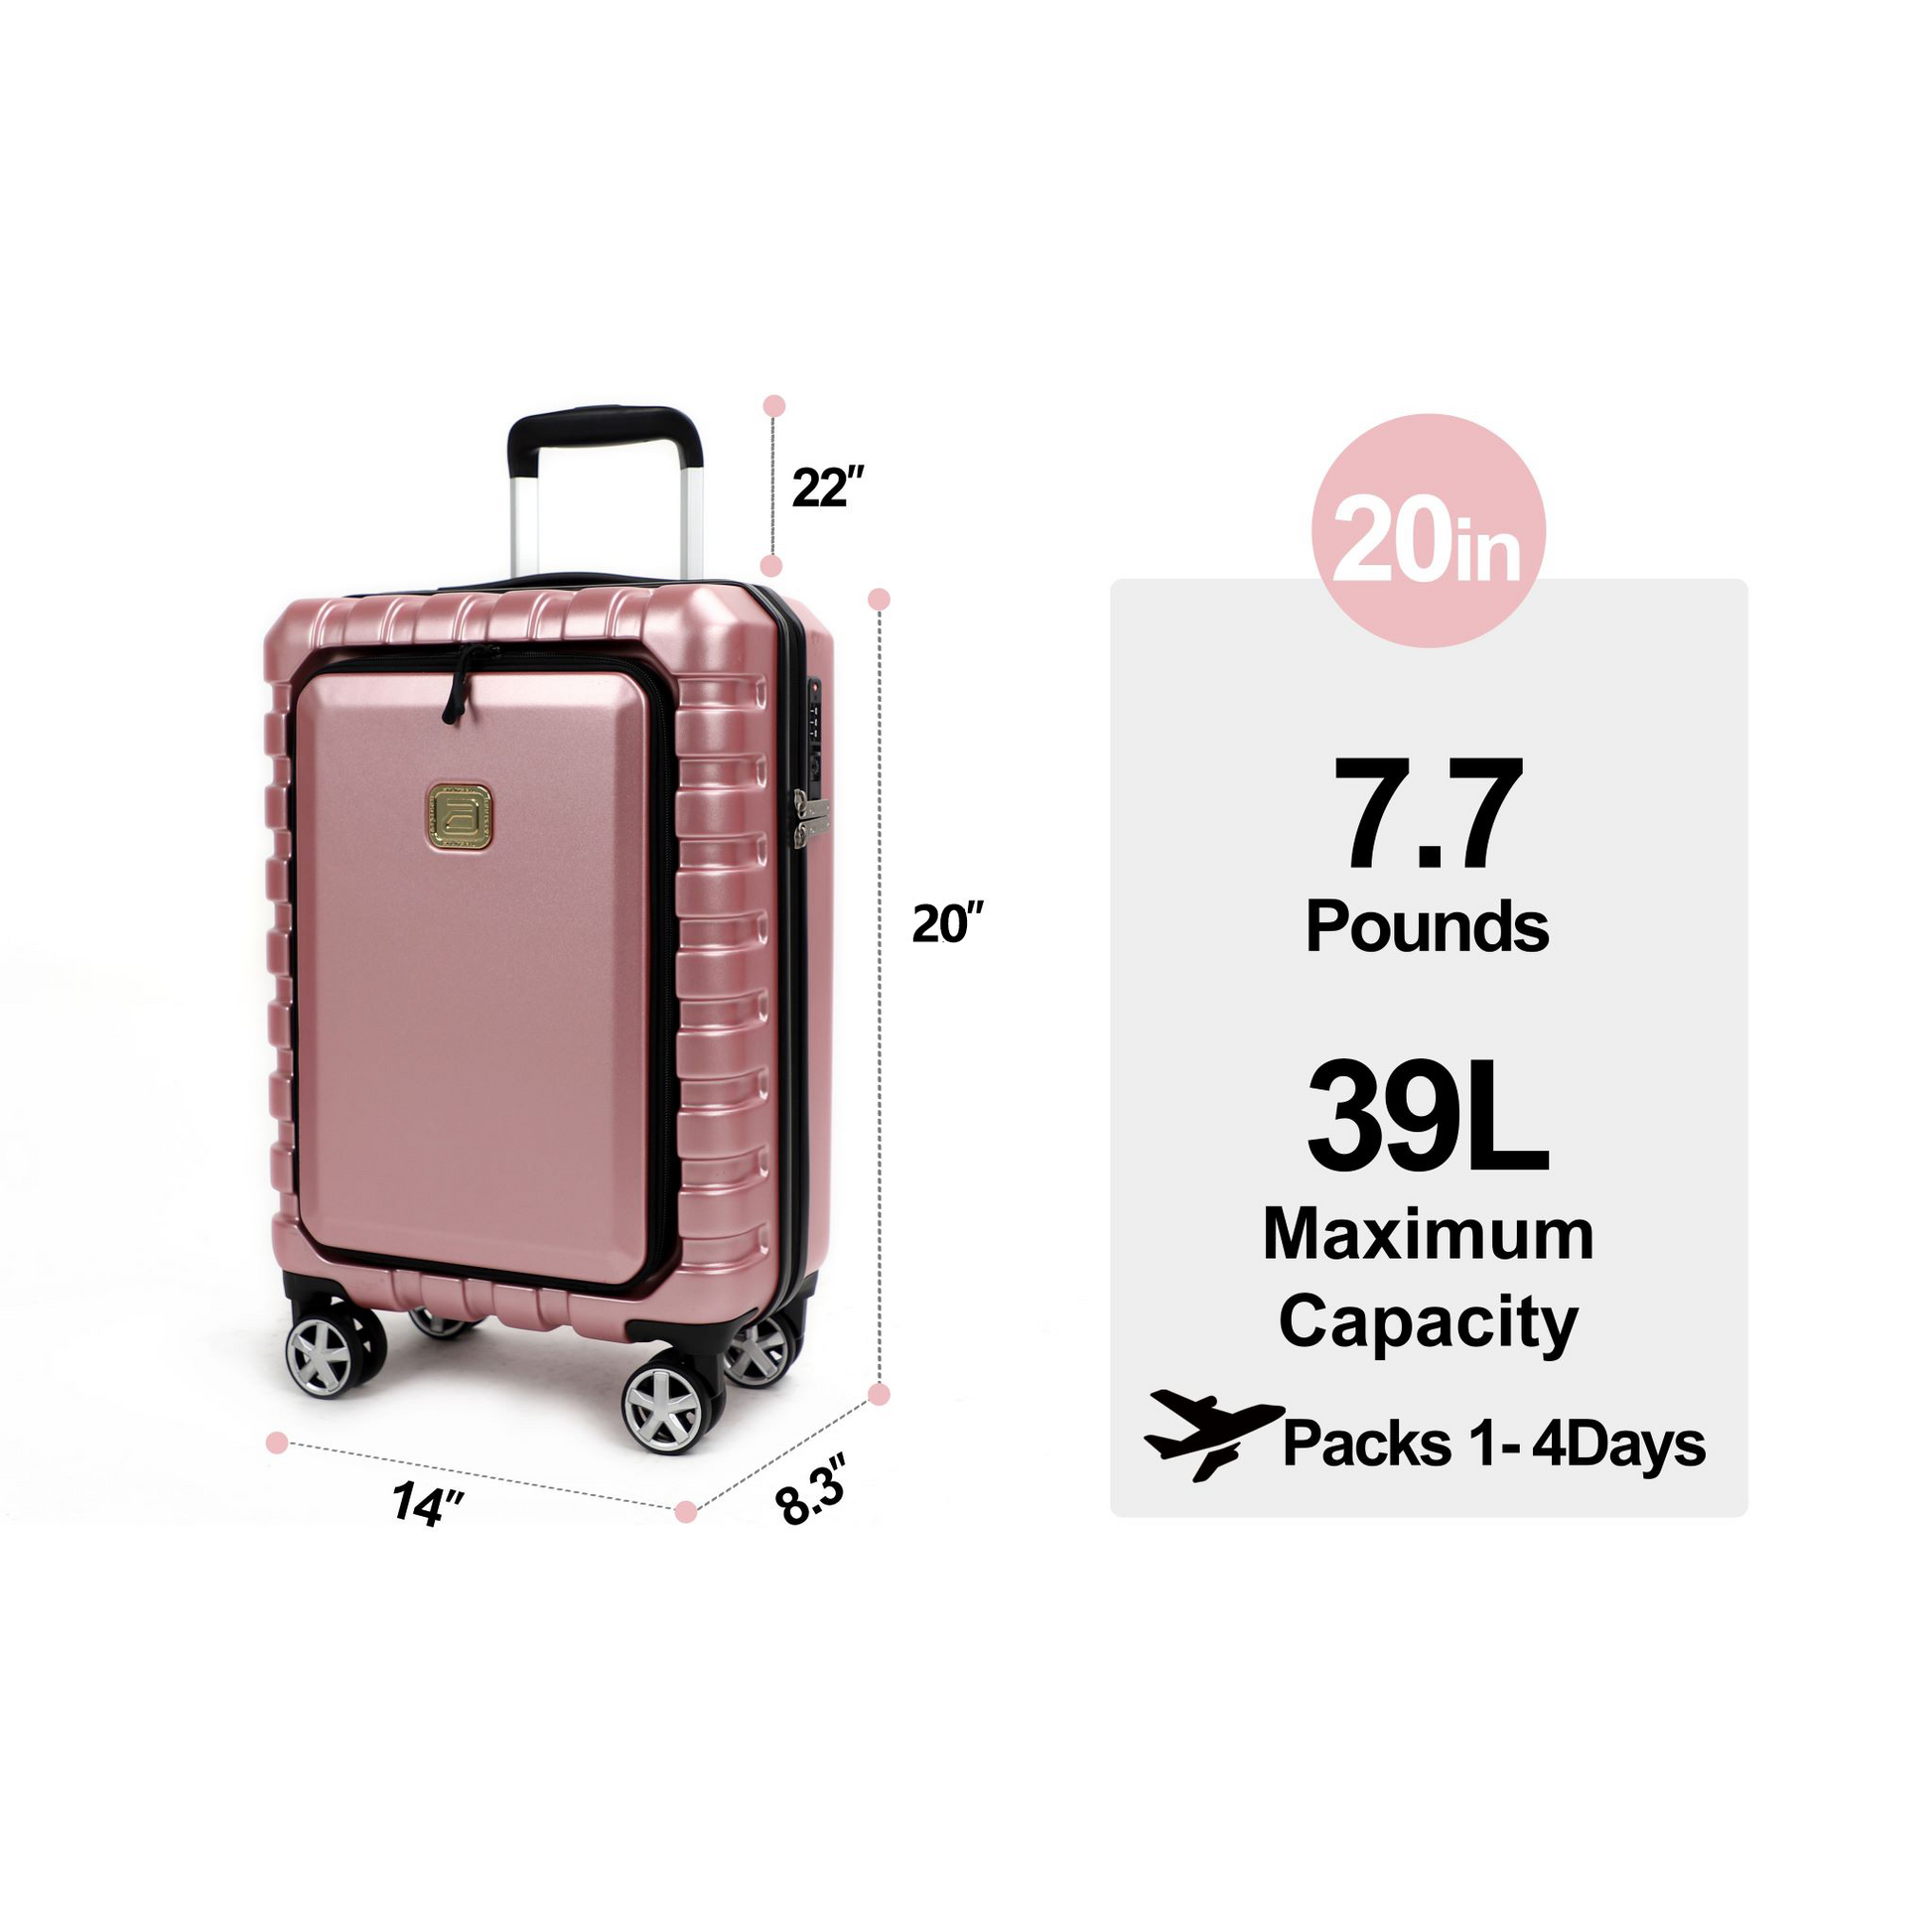 Airline_Carry_On_Luggage_Rose_Gold_Size_T1978155102